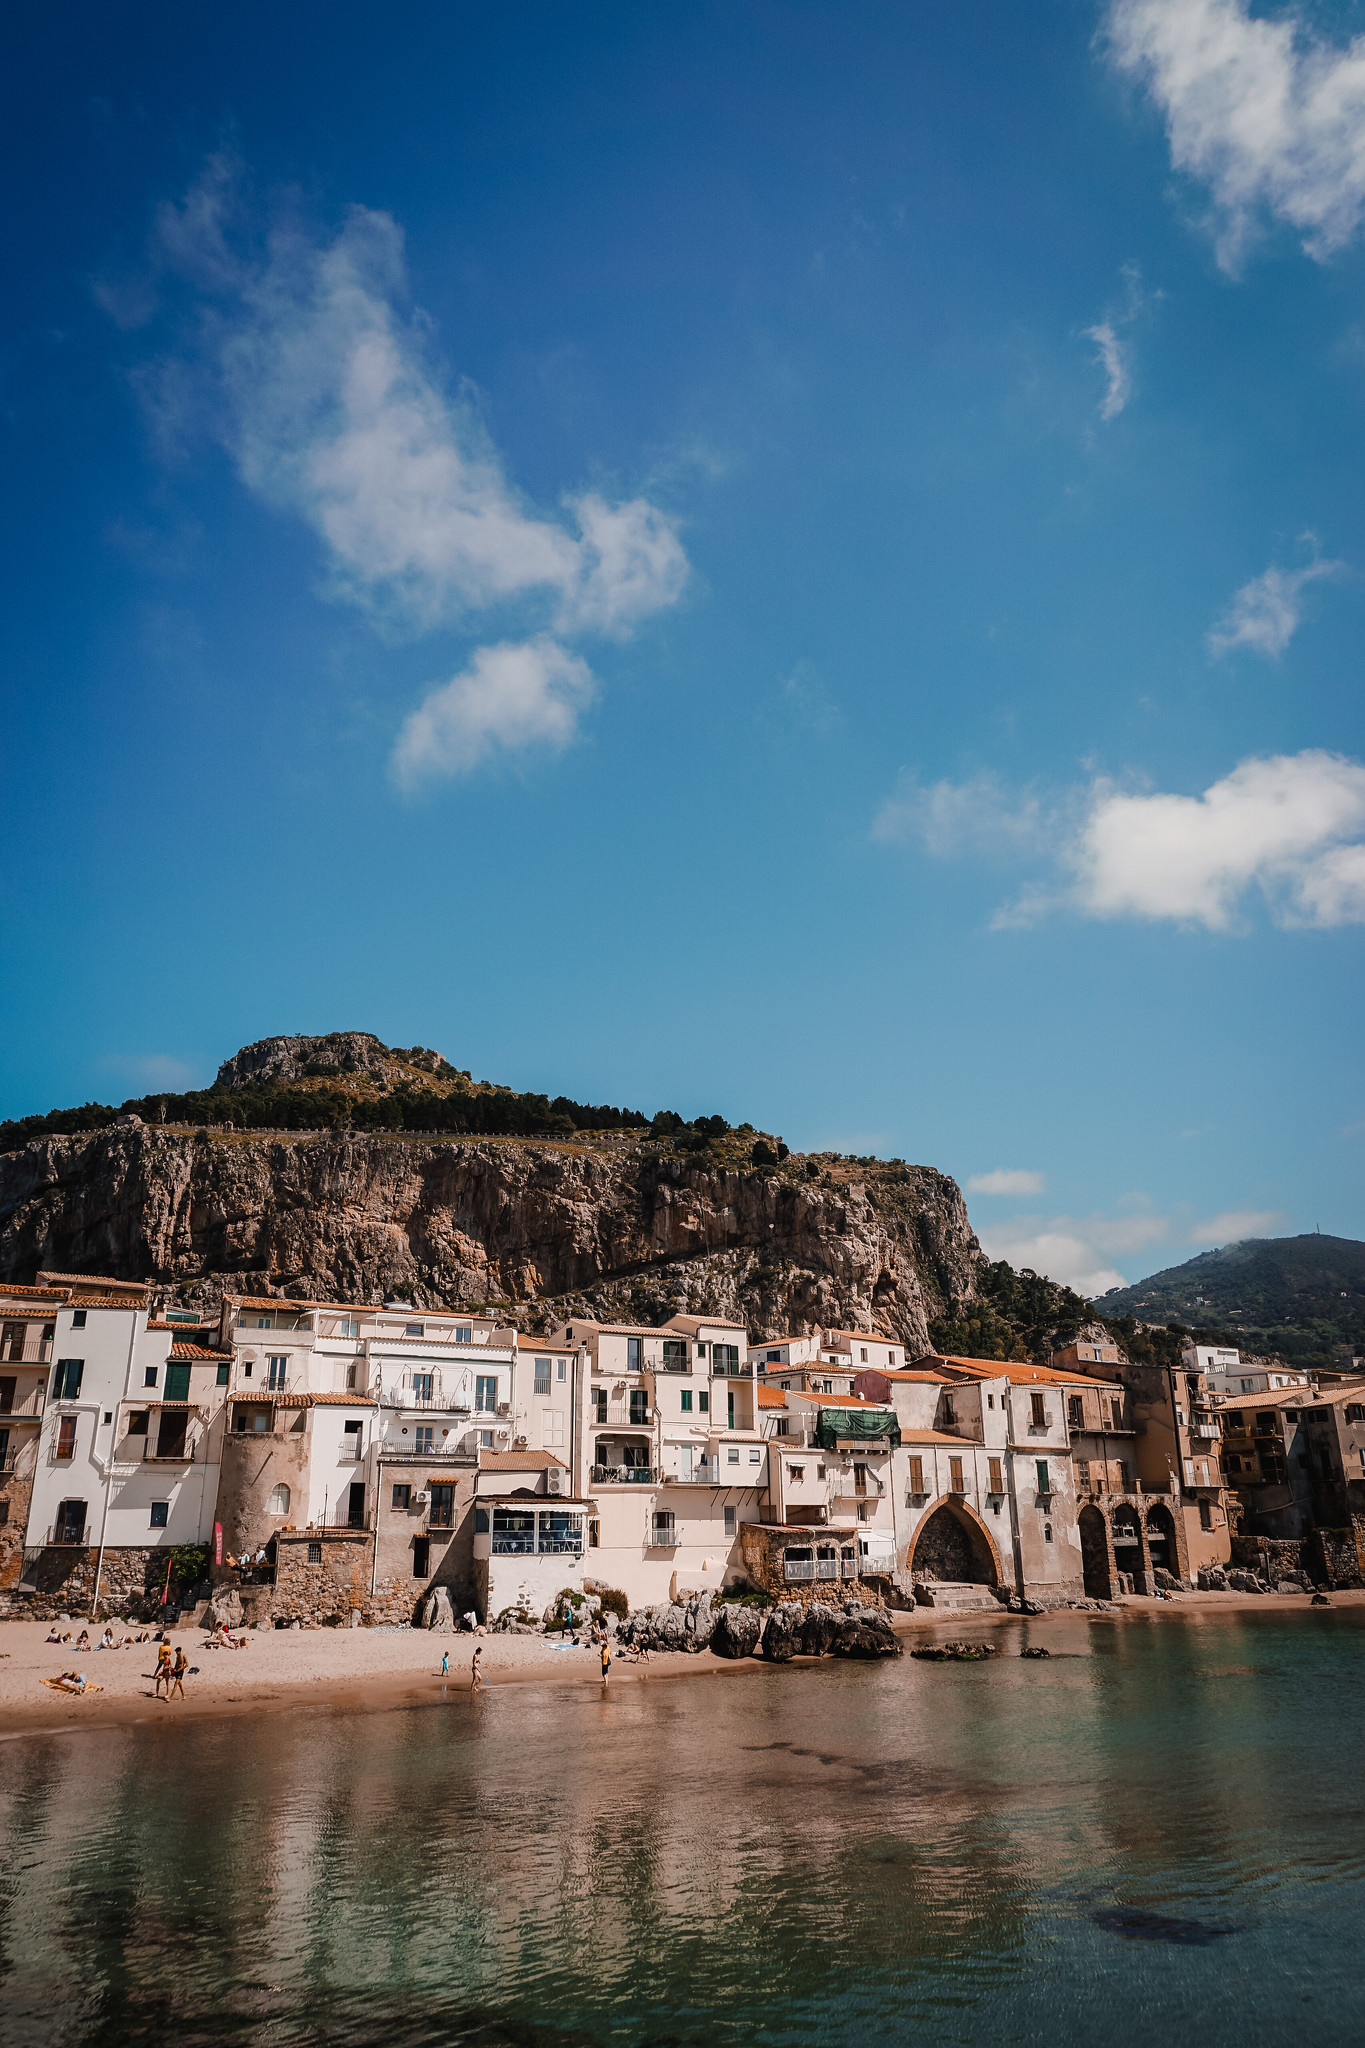 Old Town of Cefalu with La Rocca in the background | Explore the Picturesque Town of Cefalu | Cefalu Sicily Travel Guide | What to See, Do and Eat in Cefalu | Discover the Best Things to do in Cefalu, Sicily, Italy | Sicily Travel Tips | Visit Sicily